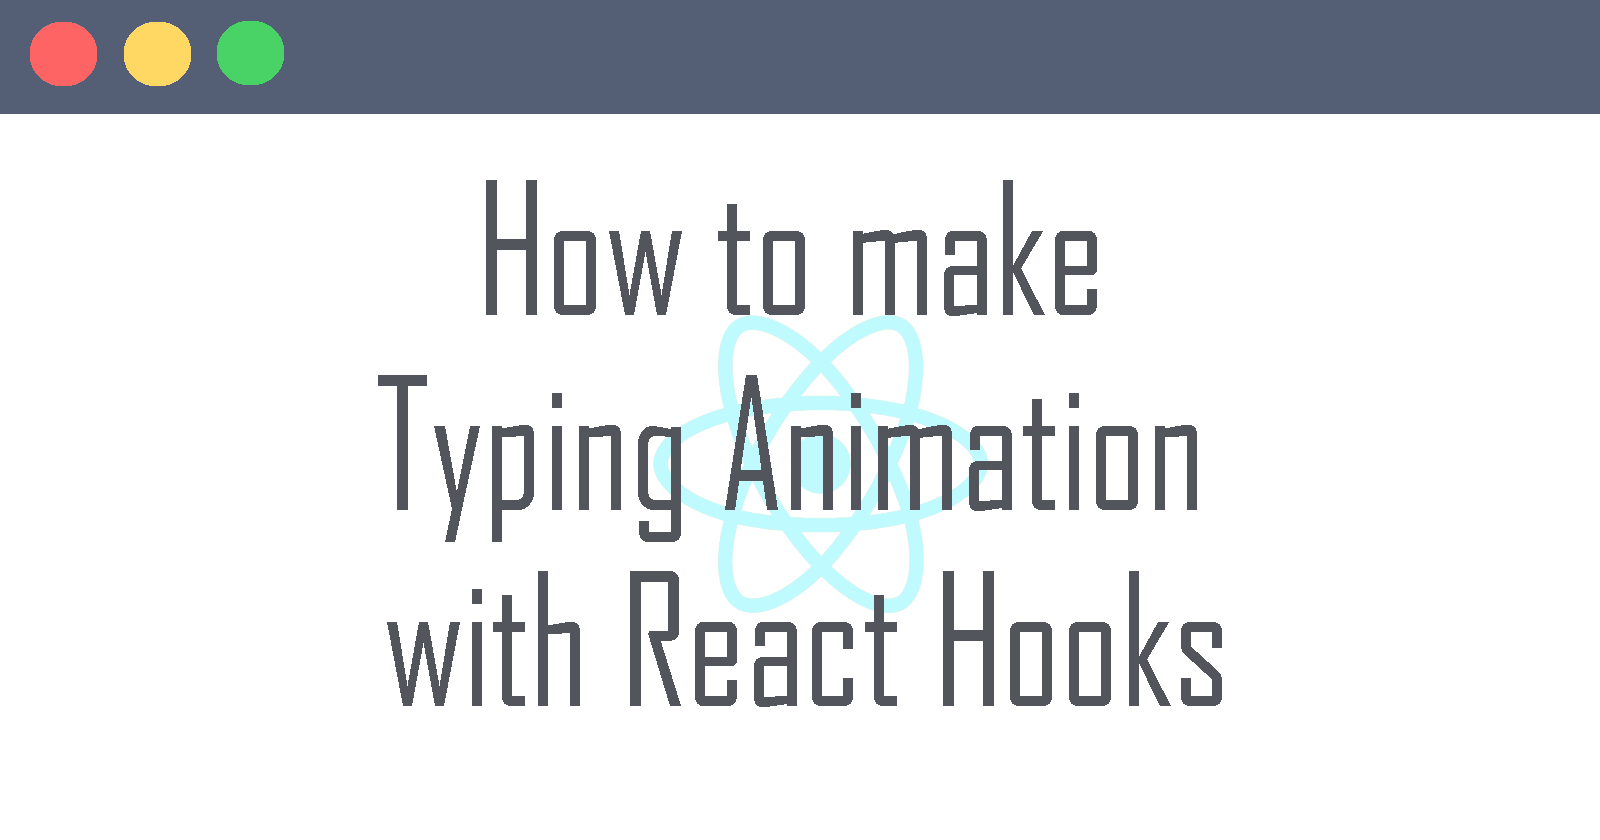 Making Typing Animation with React Hooks